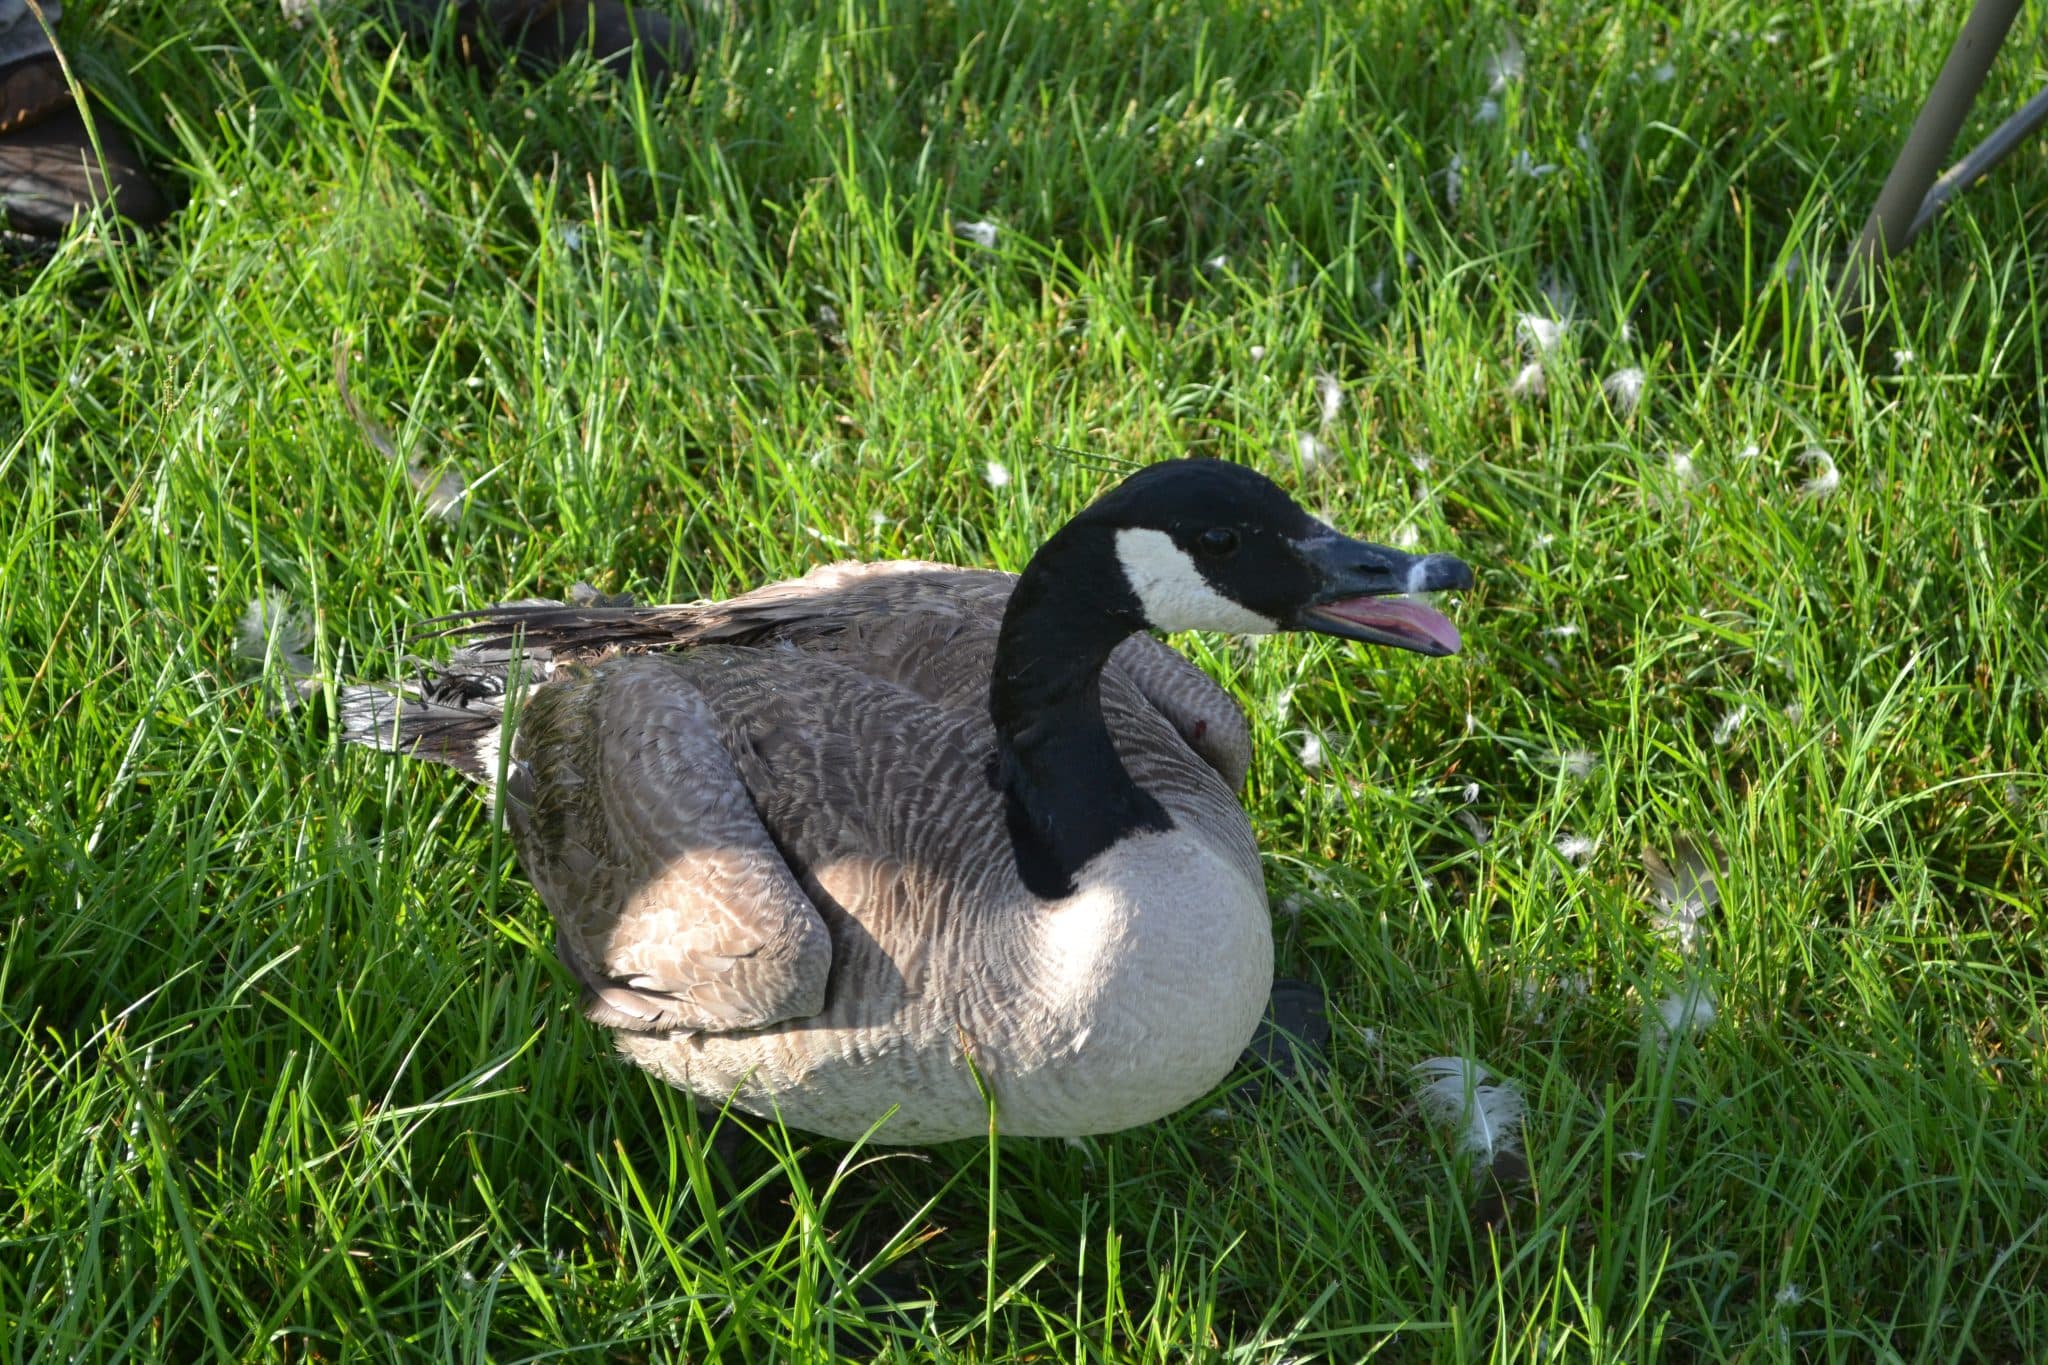 How to get rid of geese that won't leave your property